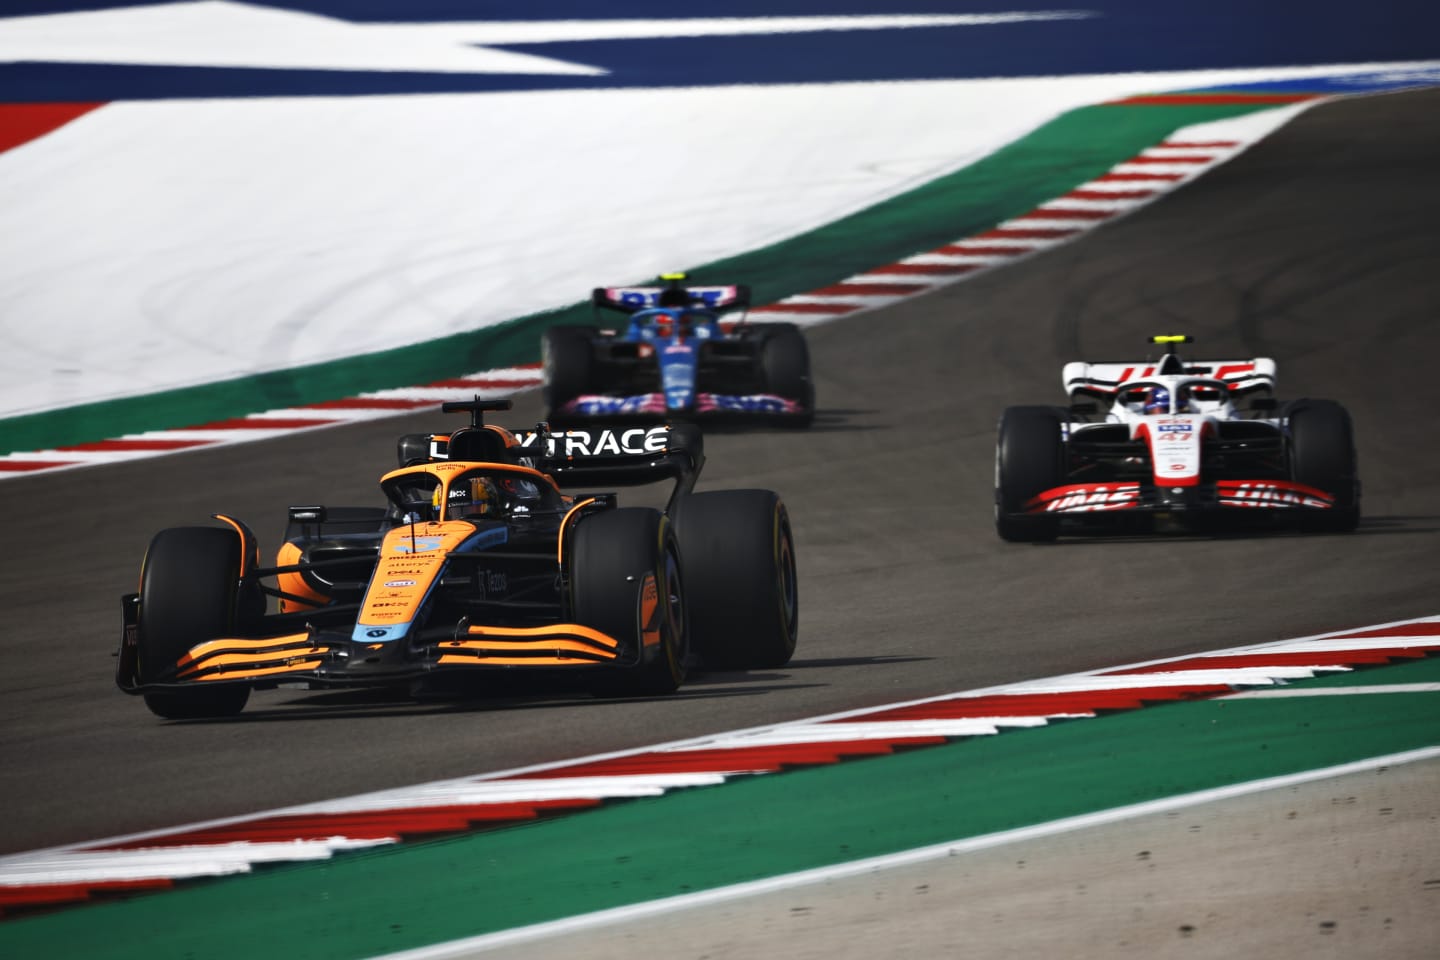 AUSTIN, TEXAS - OCTOBER 23: Daniel Ricciardo of Australia driving the (3) McLaren MCL36 Mercedes leads Mick Schumacher of Germany driving the (47) Haas F1 VF-22 Ferrari and Esteban Ocon of France driving the (31) Alpine F1 A522 Renault on track during the F1 Grand Prix of USA at Circuit of The Americas on October 23, 2022 in Austin, Texas. (Photo by Chris Graythen/Getty Images)